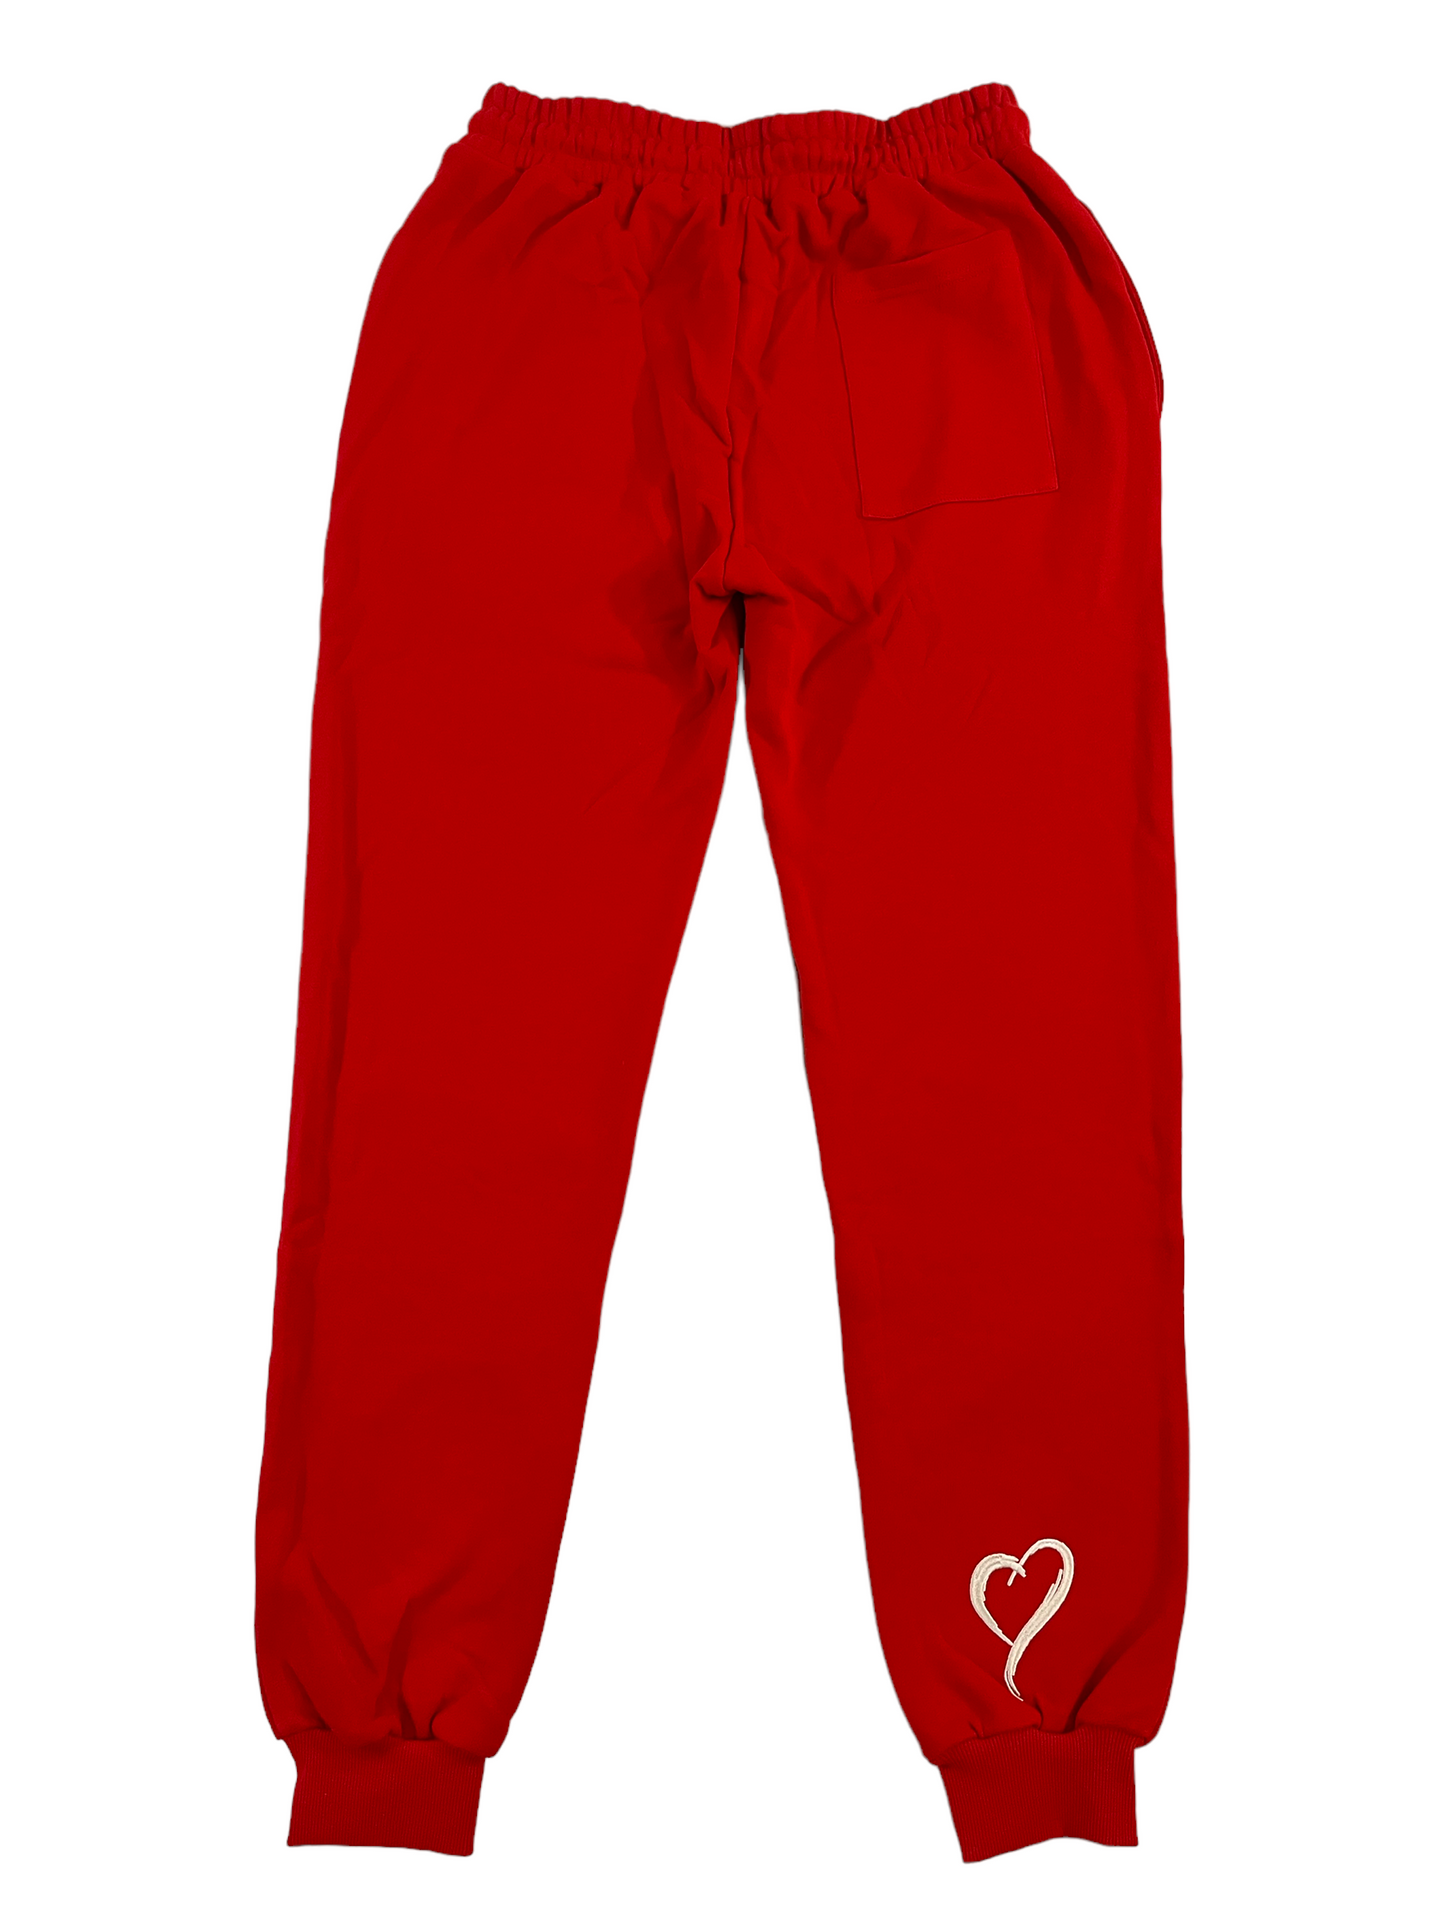 Joggers - Red with White Embroidery